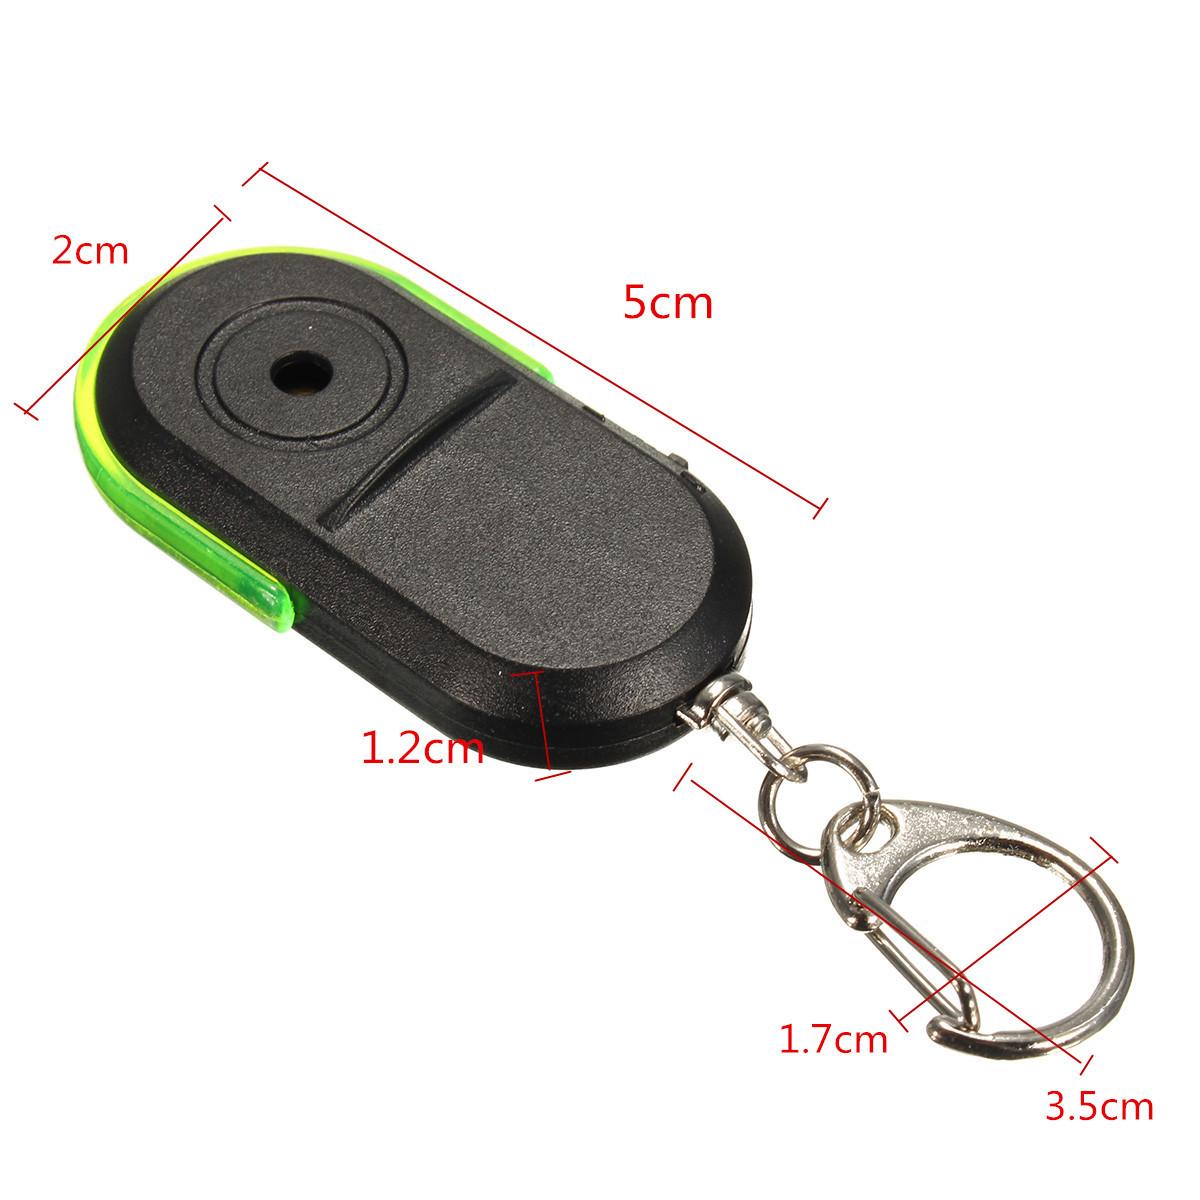 Wireless-Anti-Lost-Alarm-Key-Finder-Locator-Keychain-Whistle-Sound-with-LED-Light-1030593-10